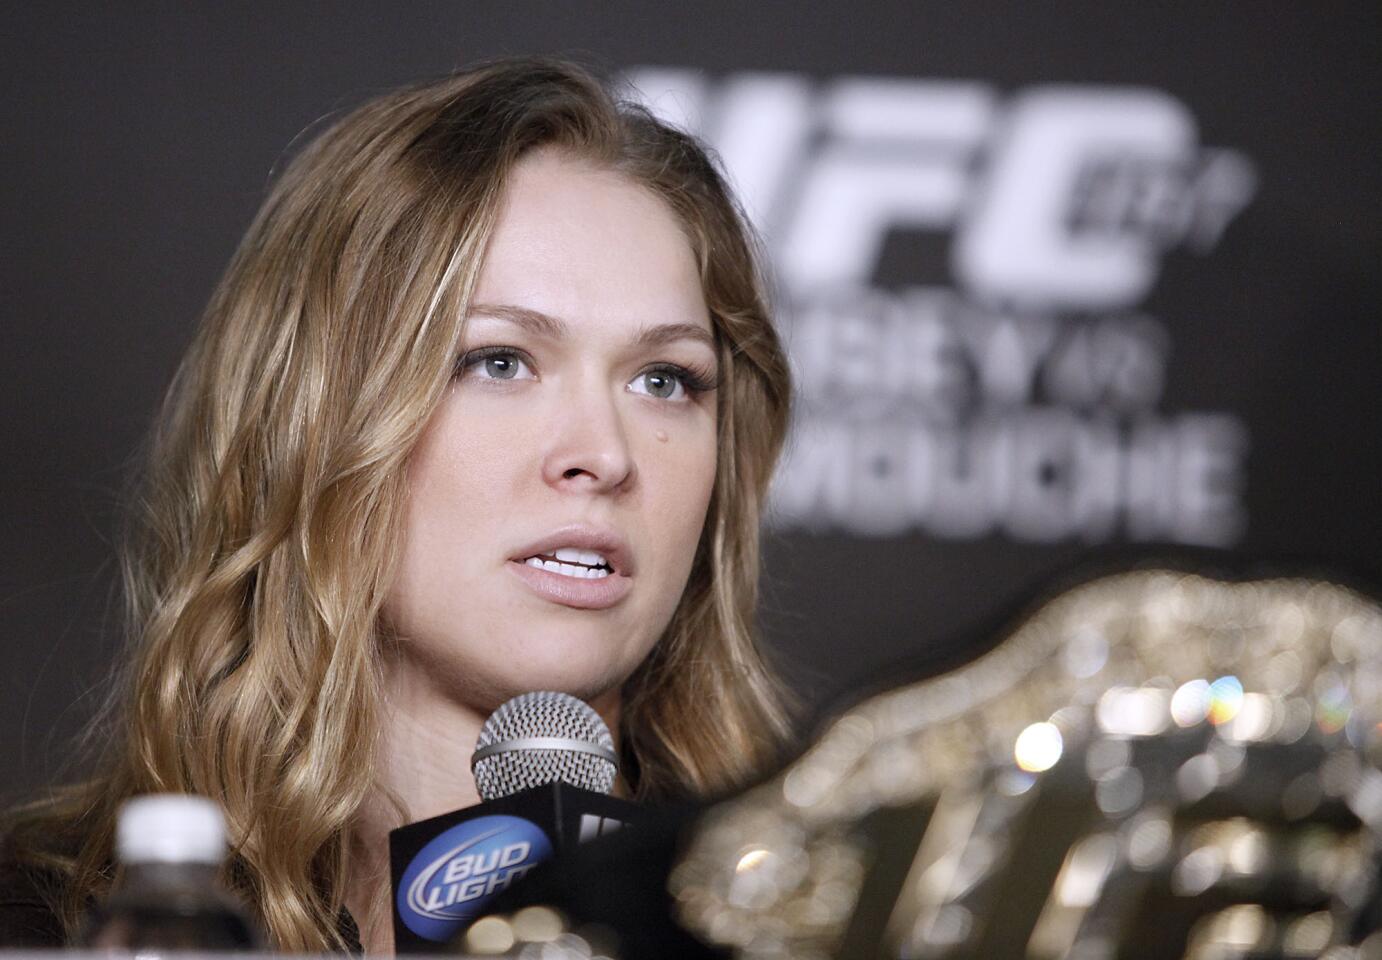 Photo Gallery: Press conference UFC157 local Ronda Rousey defends championship belt